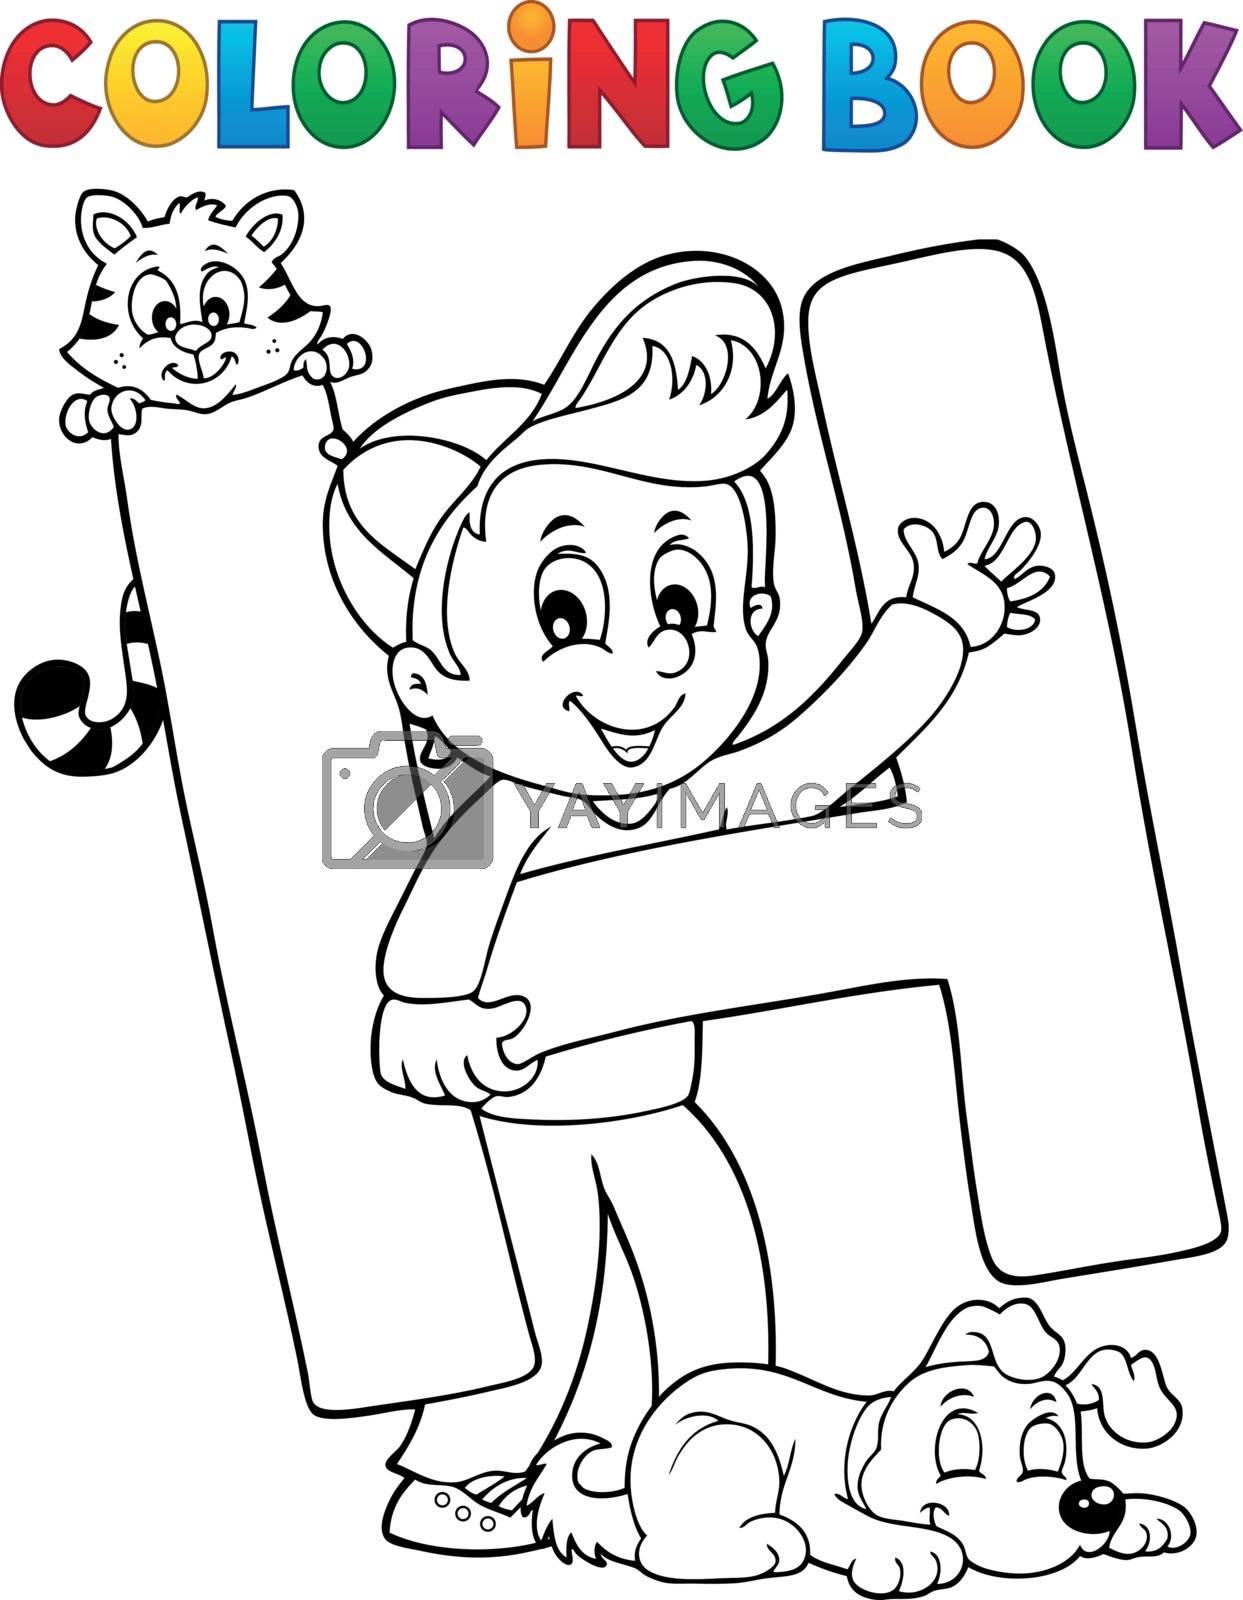 Coloring book boy and pets by letter H - eps10 vector illustration.